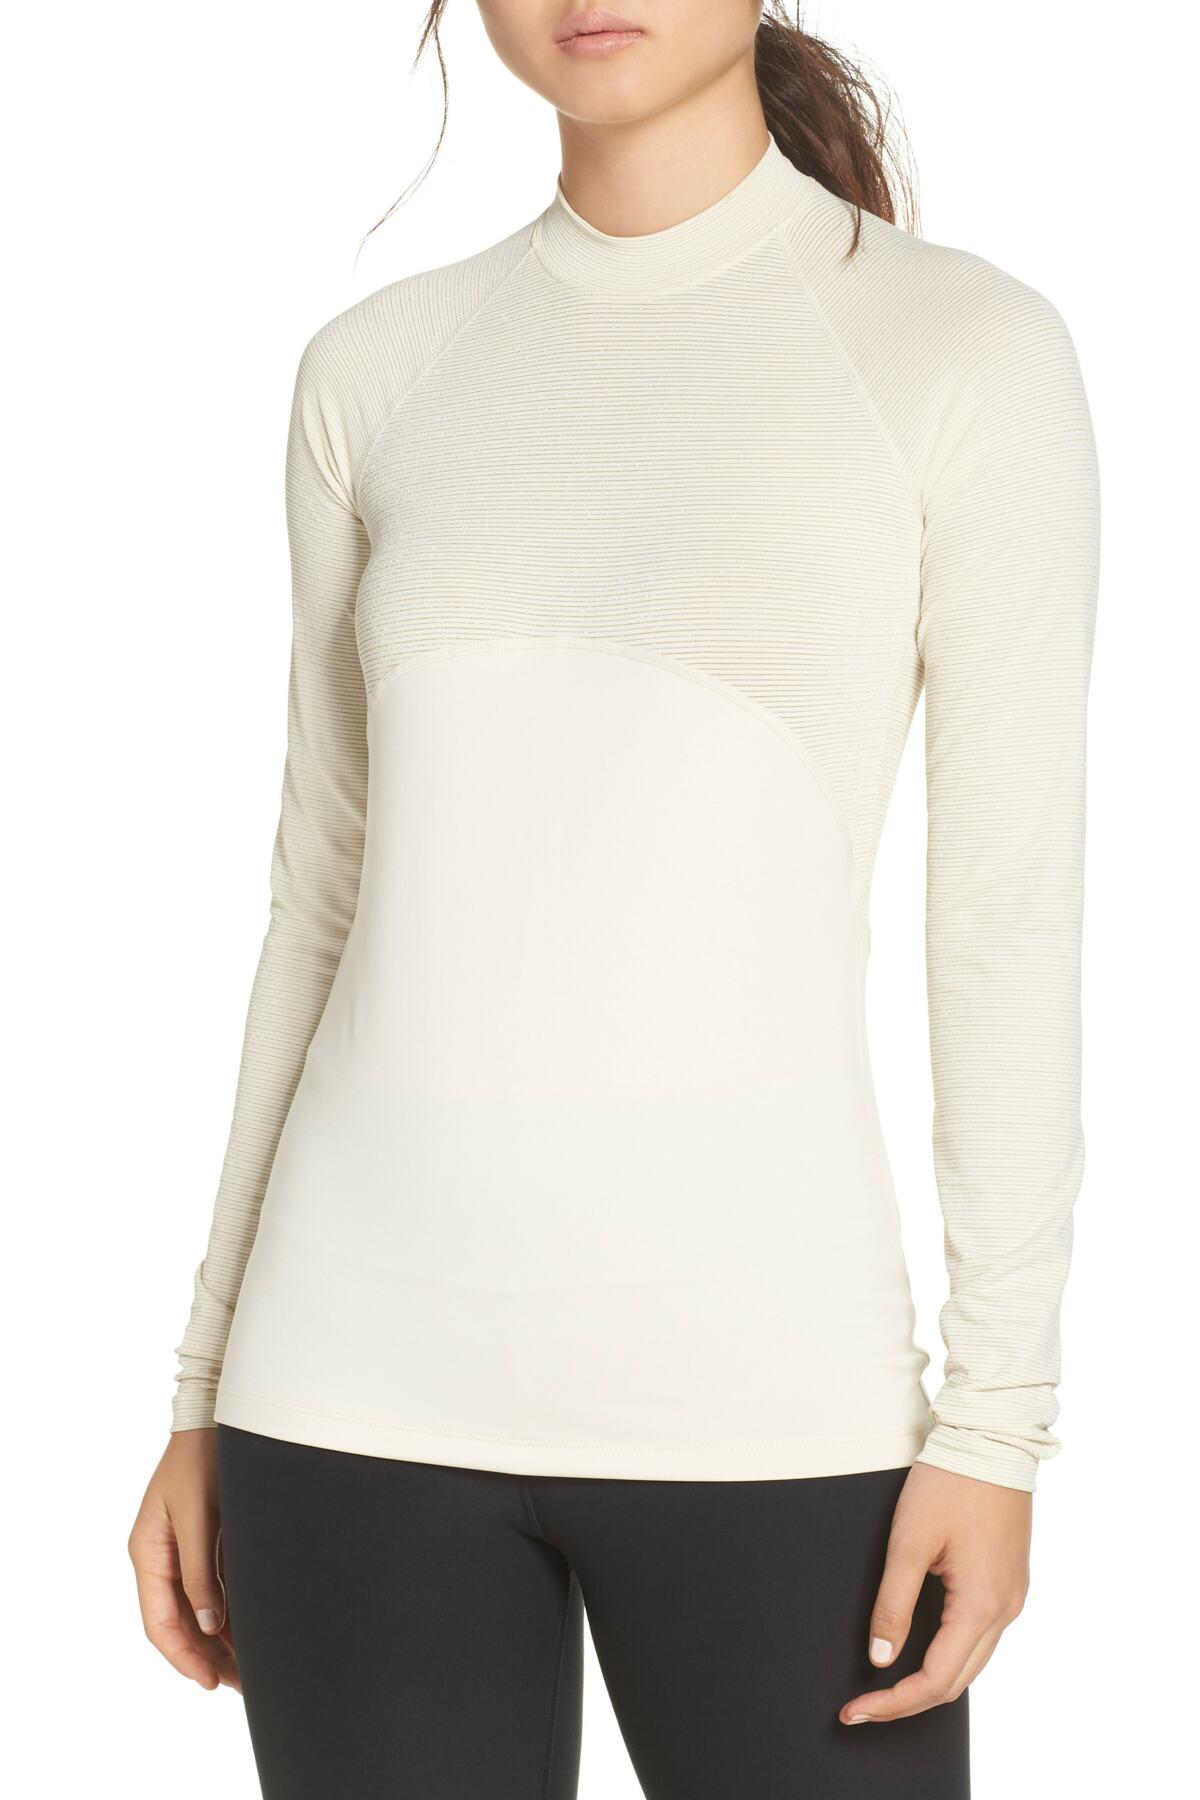 Nike Pro Warm Sparkle Long-sleeve Top in Light Cream (Natural) - Lyst